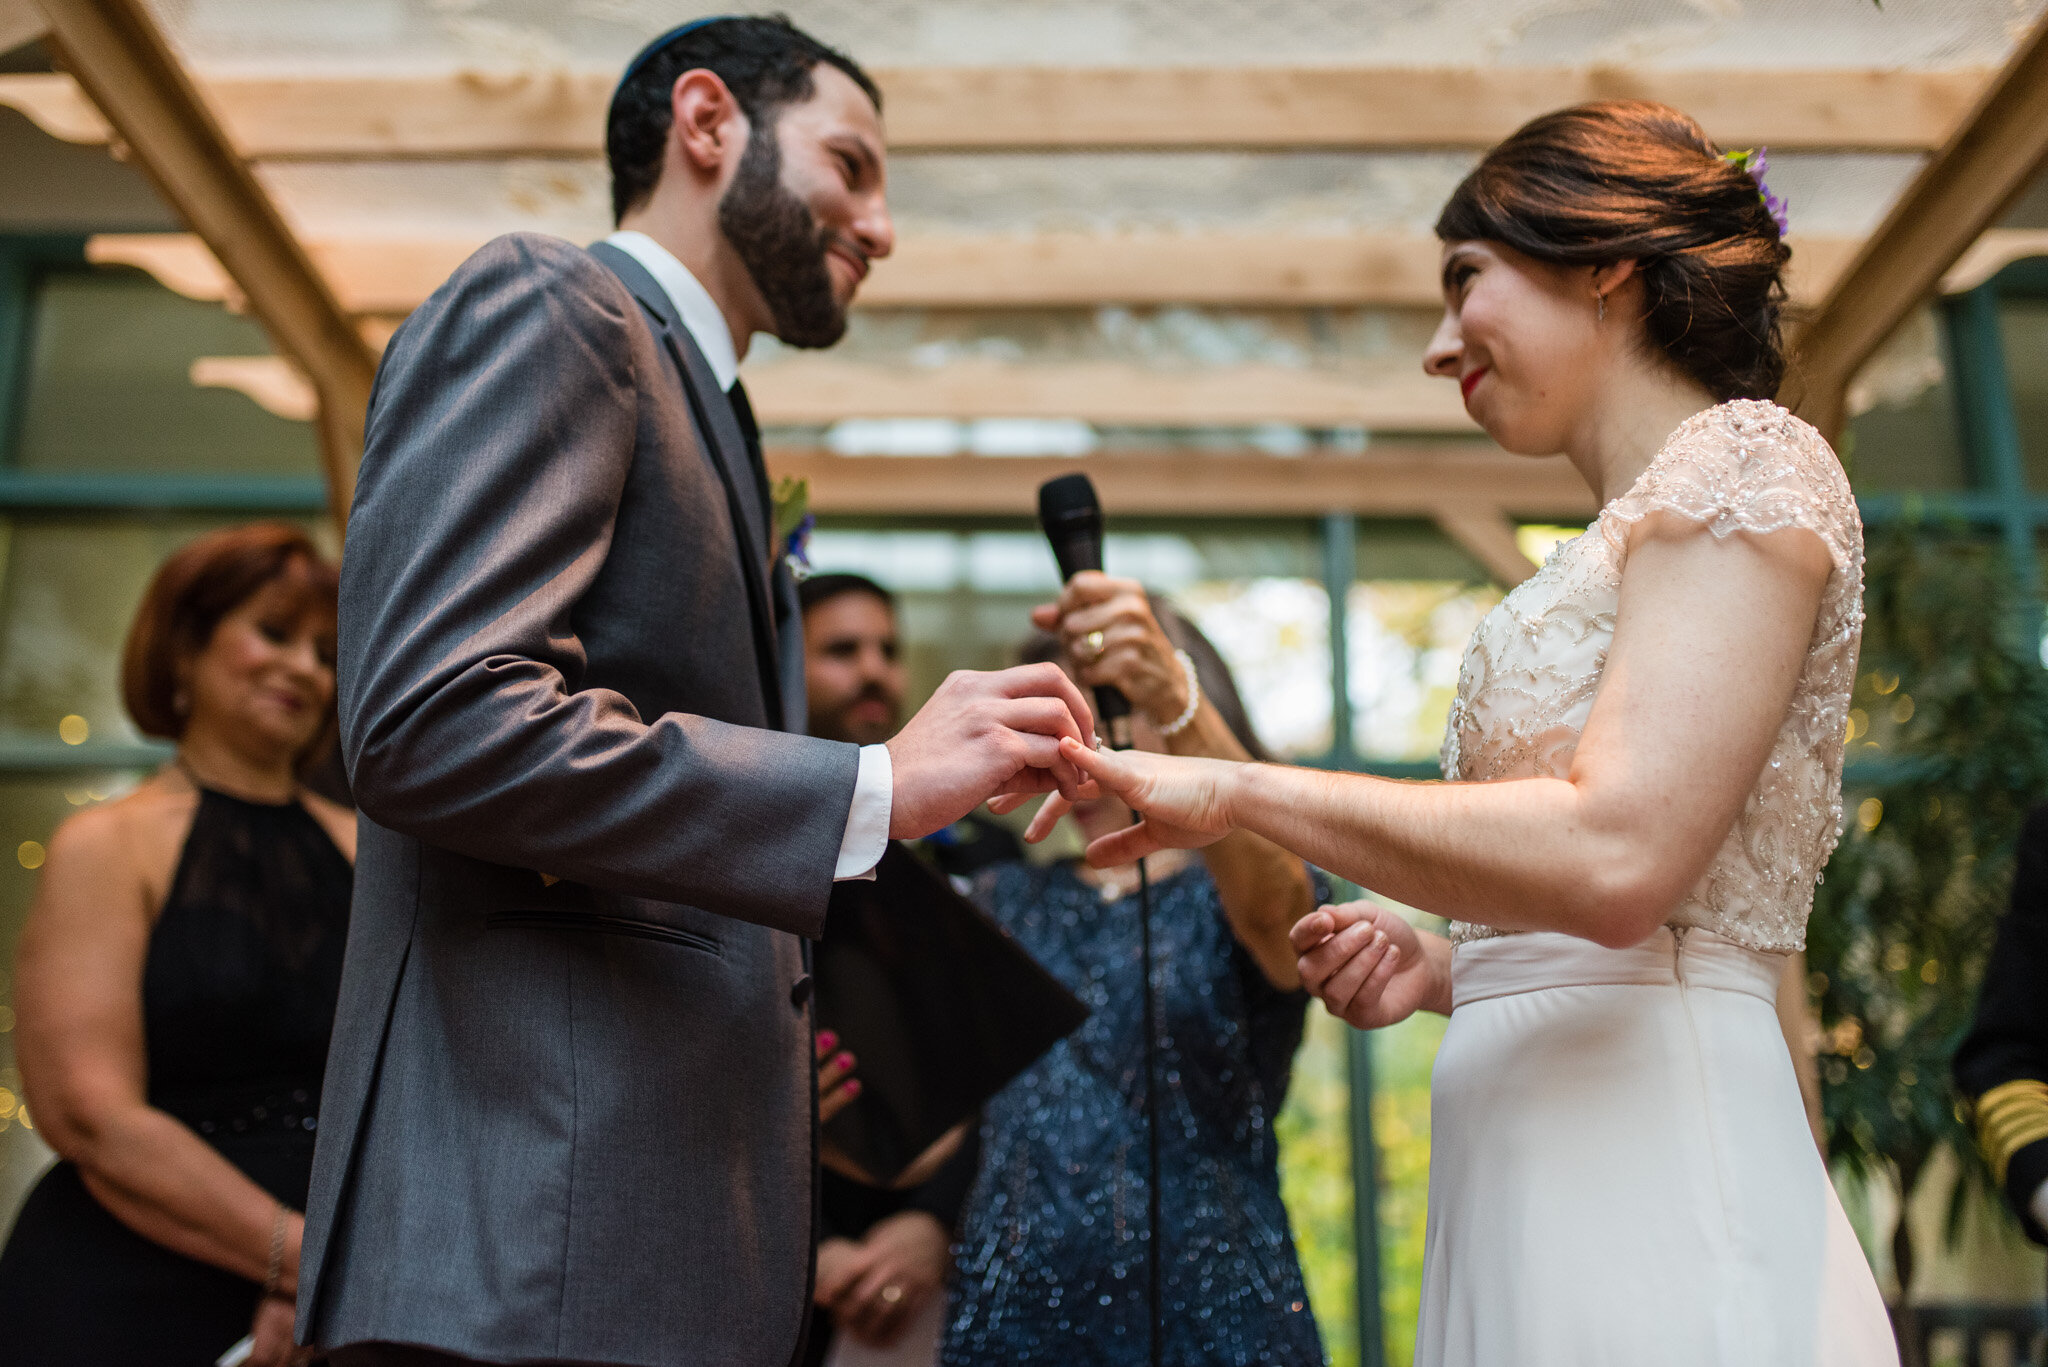 Groom places the ring on his bride's finger at their jewish wedding ceremony